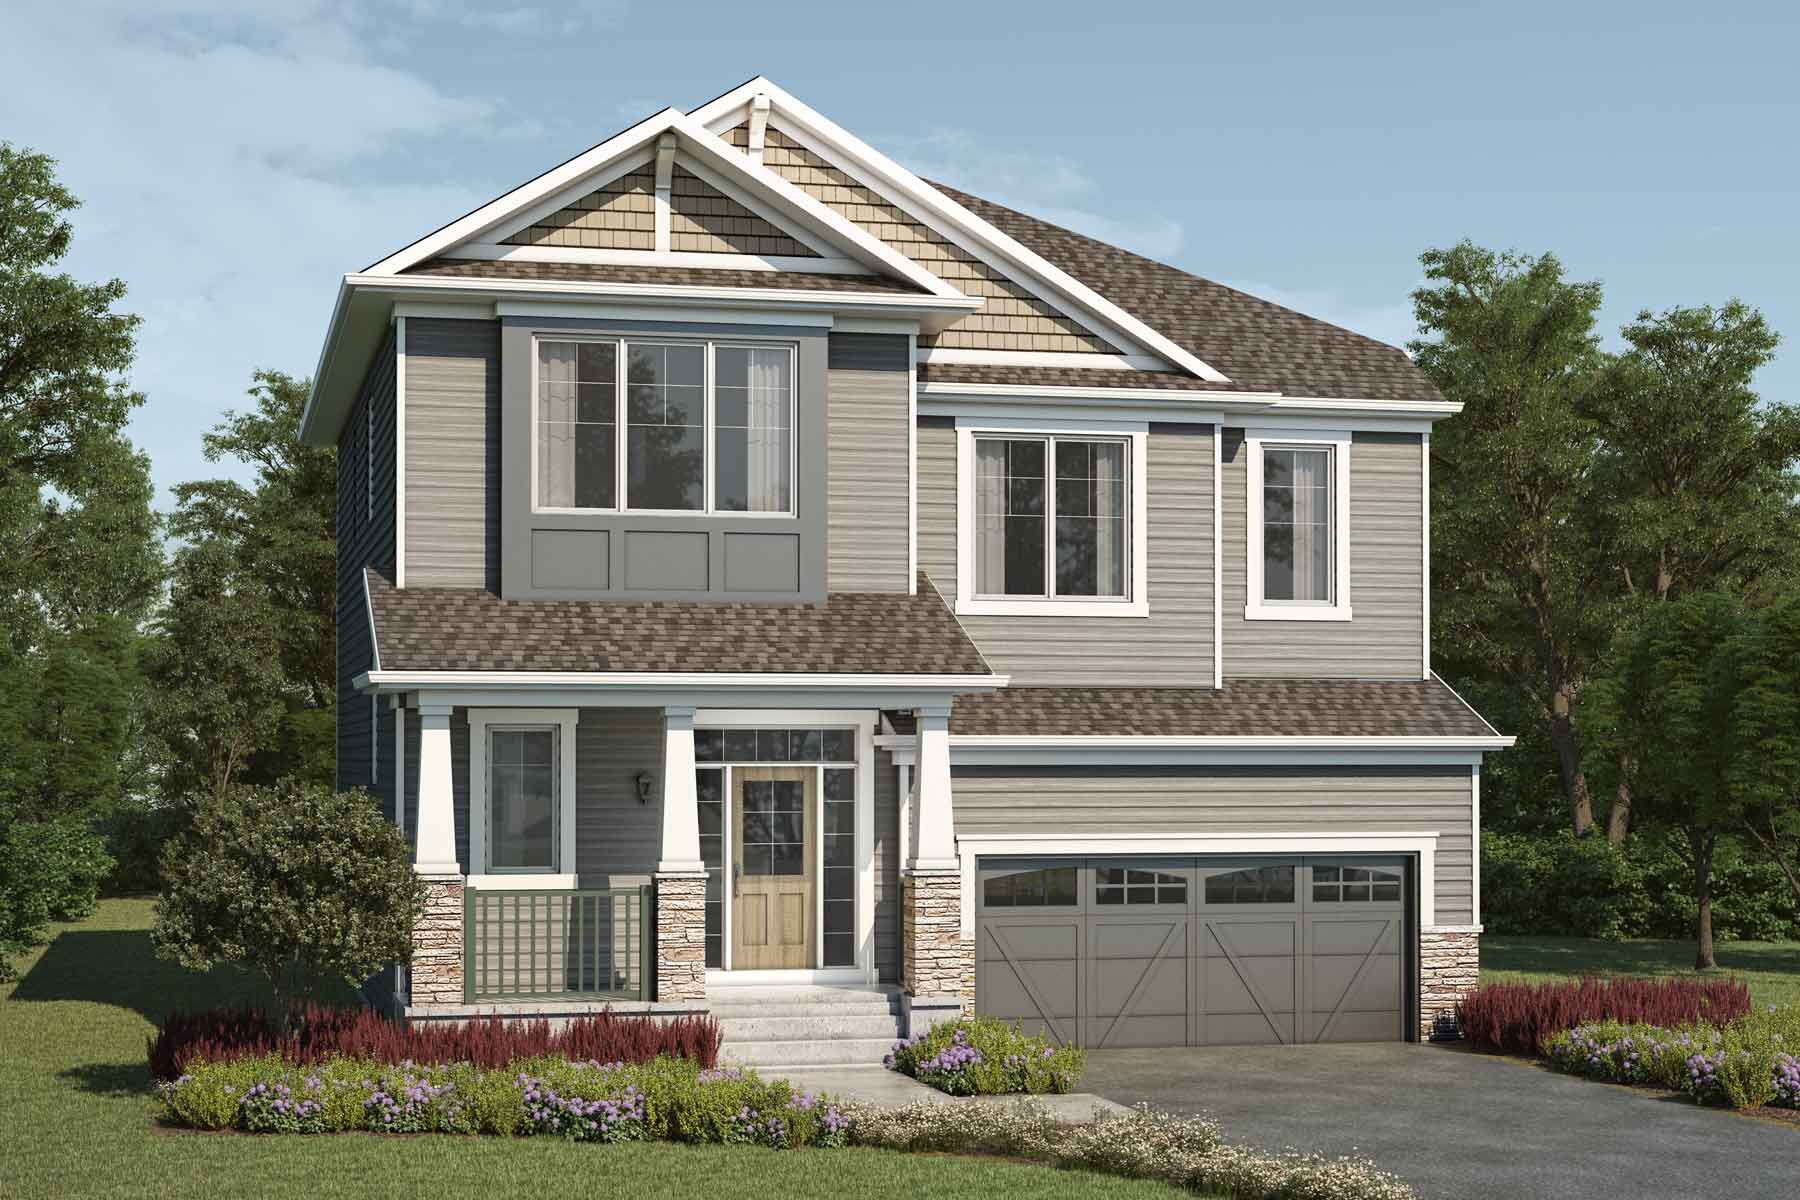 Craftsman style detached home with a double car garage.